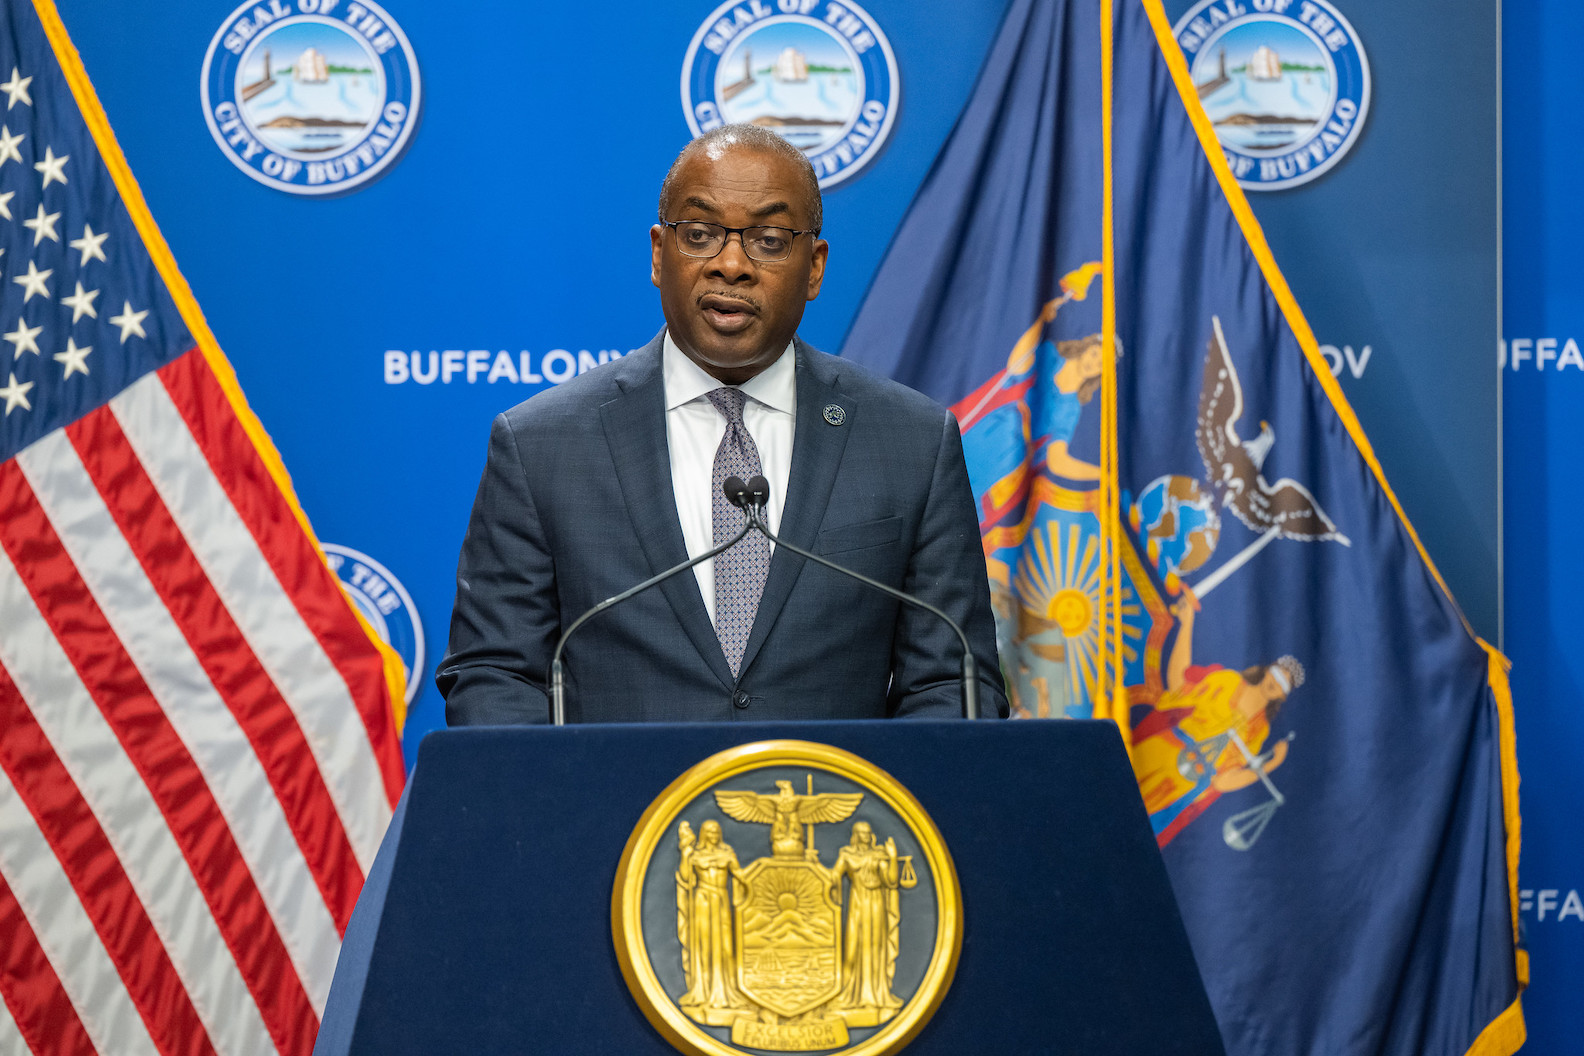 City of Buffalo Mayor Byron Brown addresses the media and guests. (Photo by (Darren McGee/Office of Gov. Kathy Hochul)